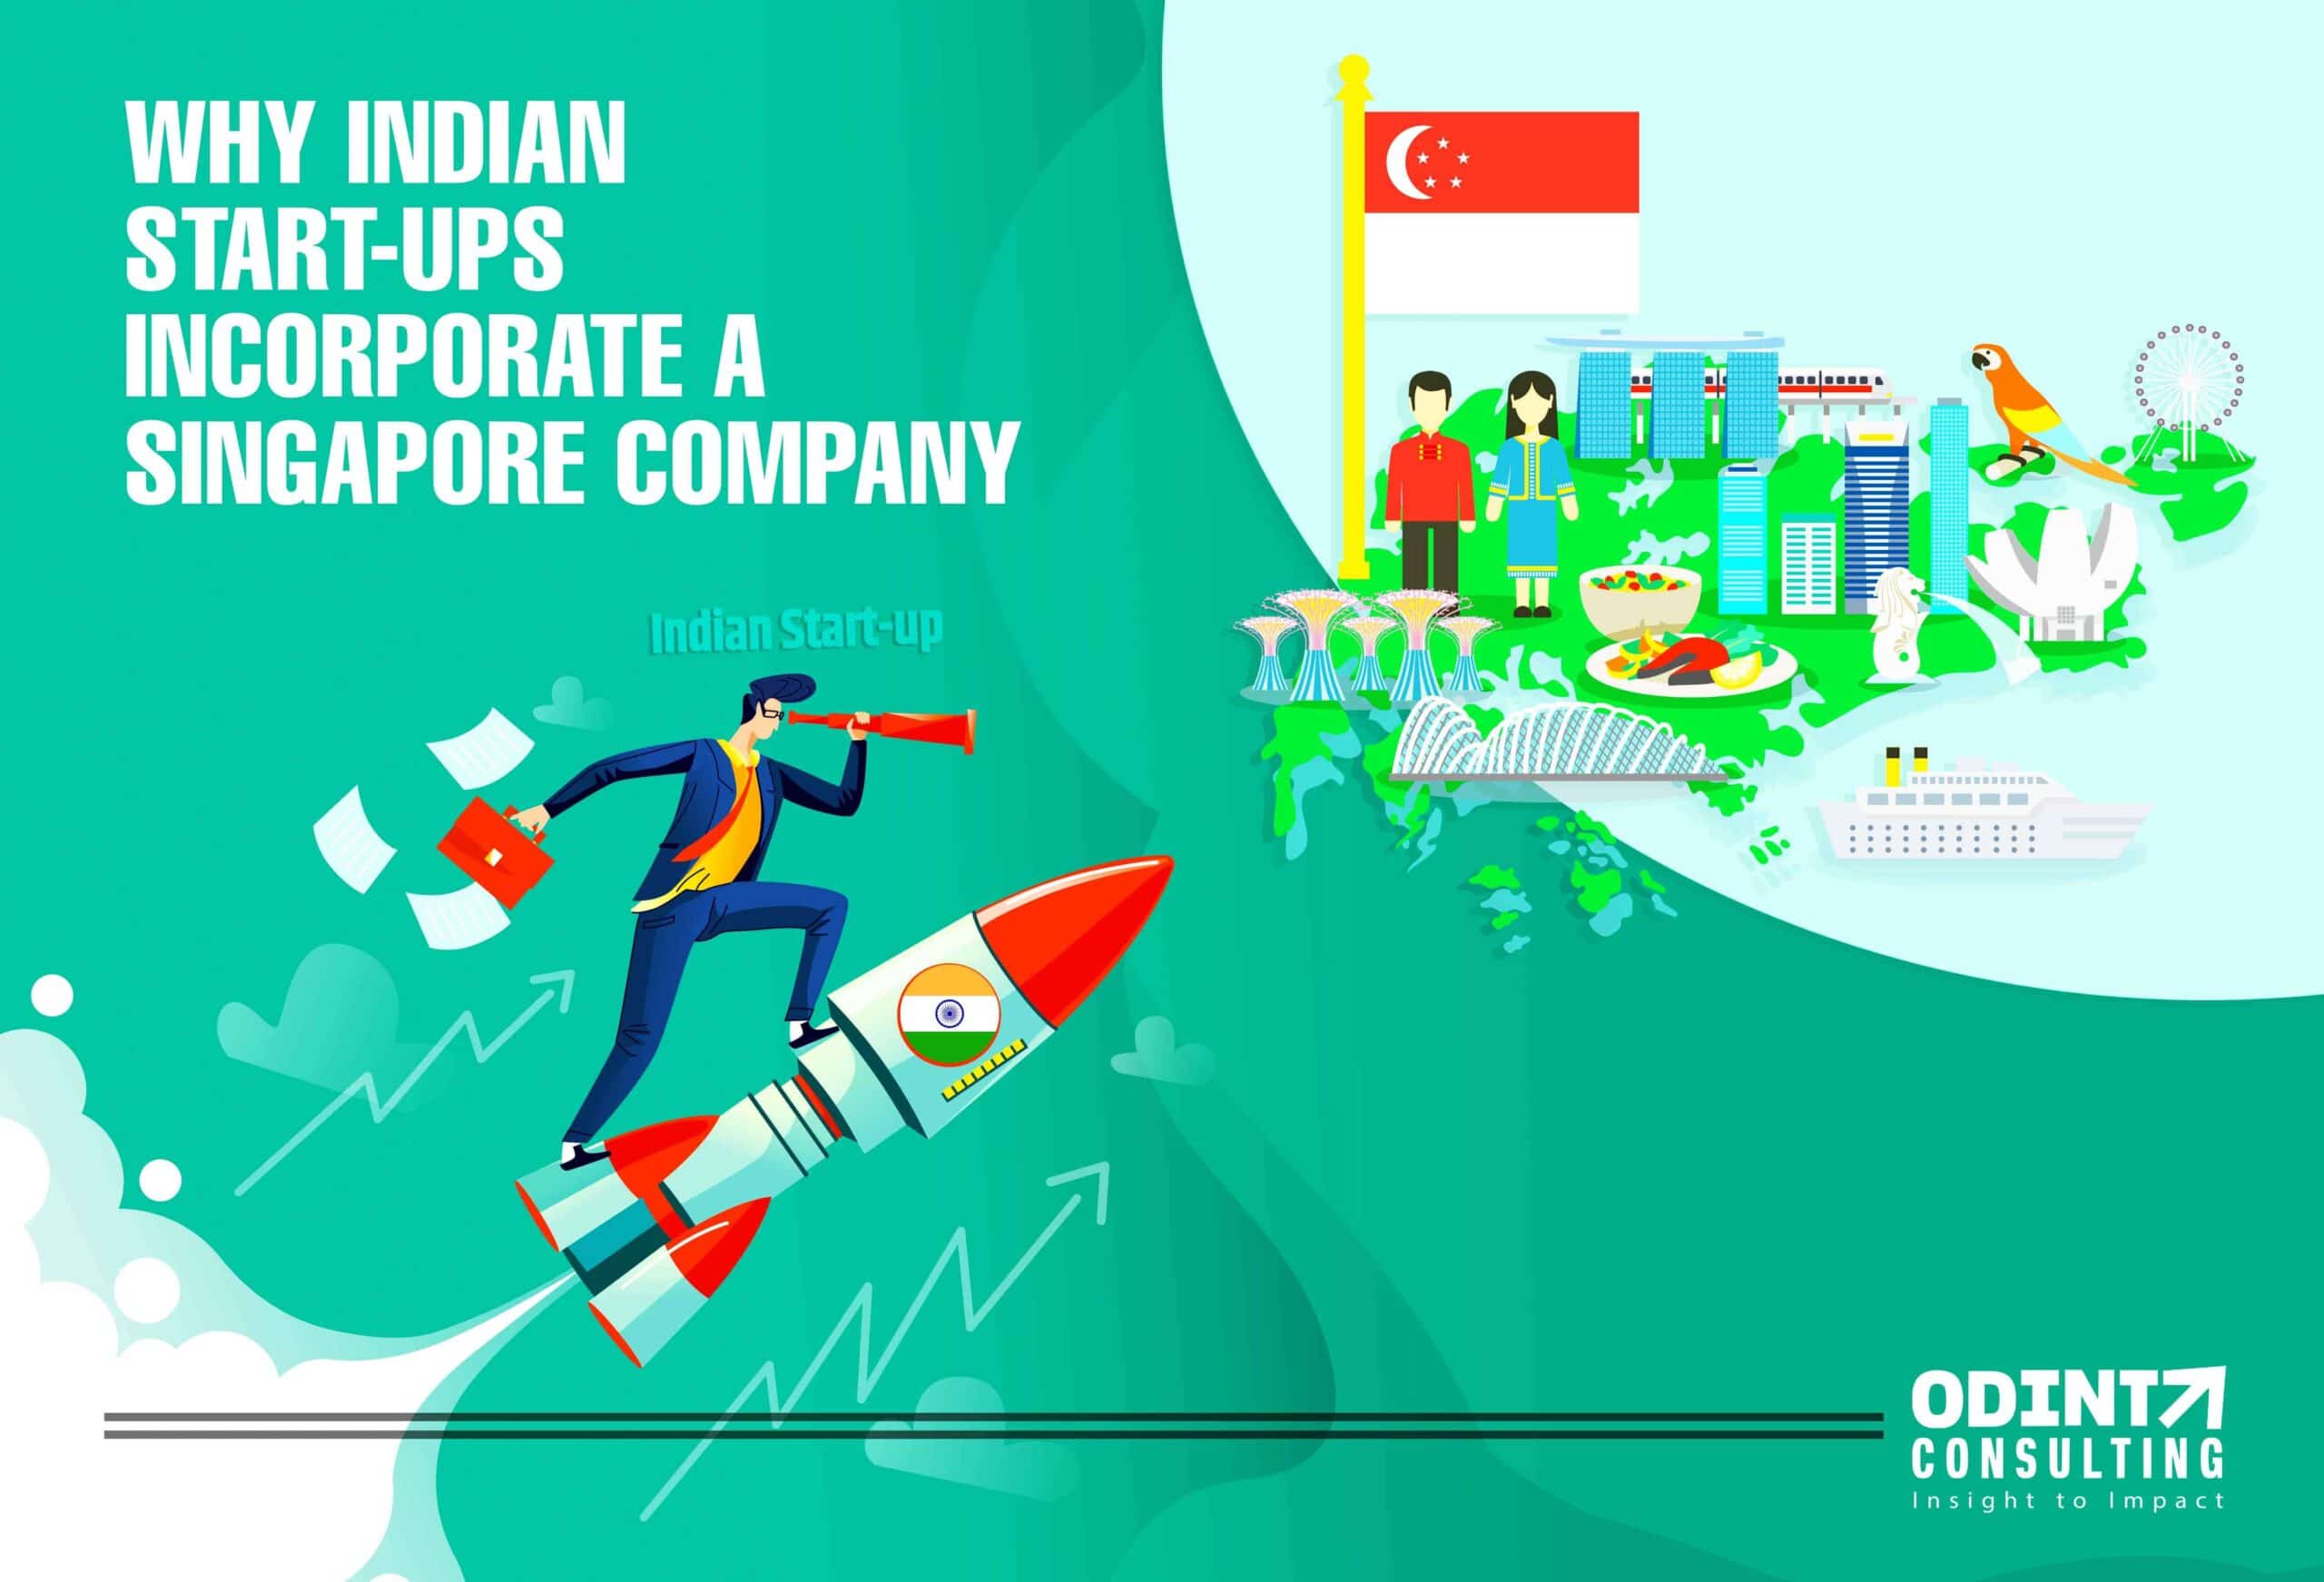 Why Indian Start-ups Incorporate A Singapore Company?